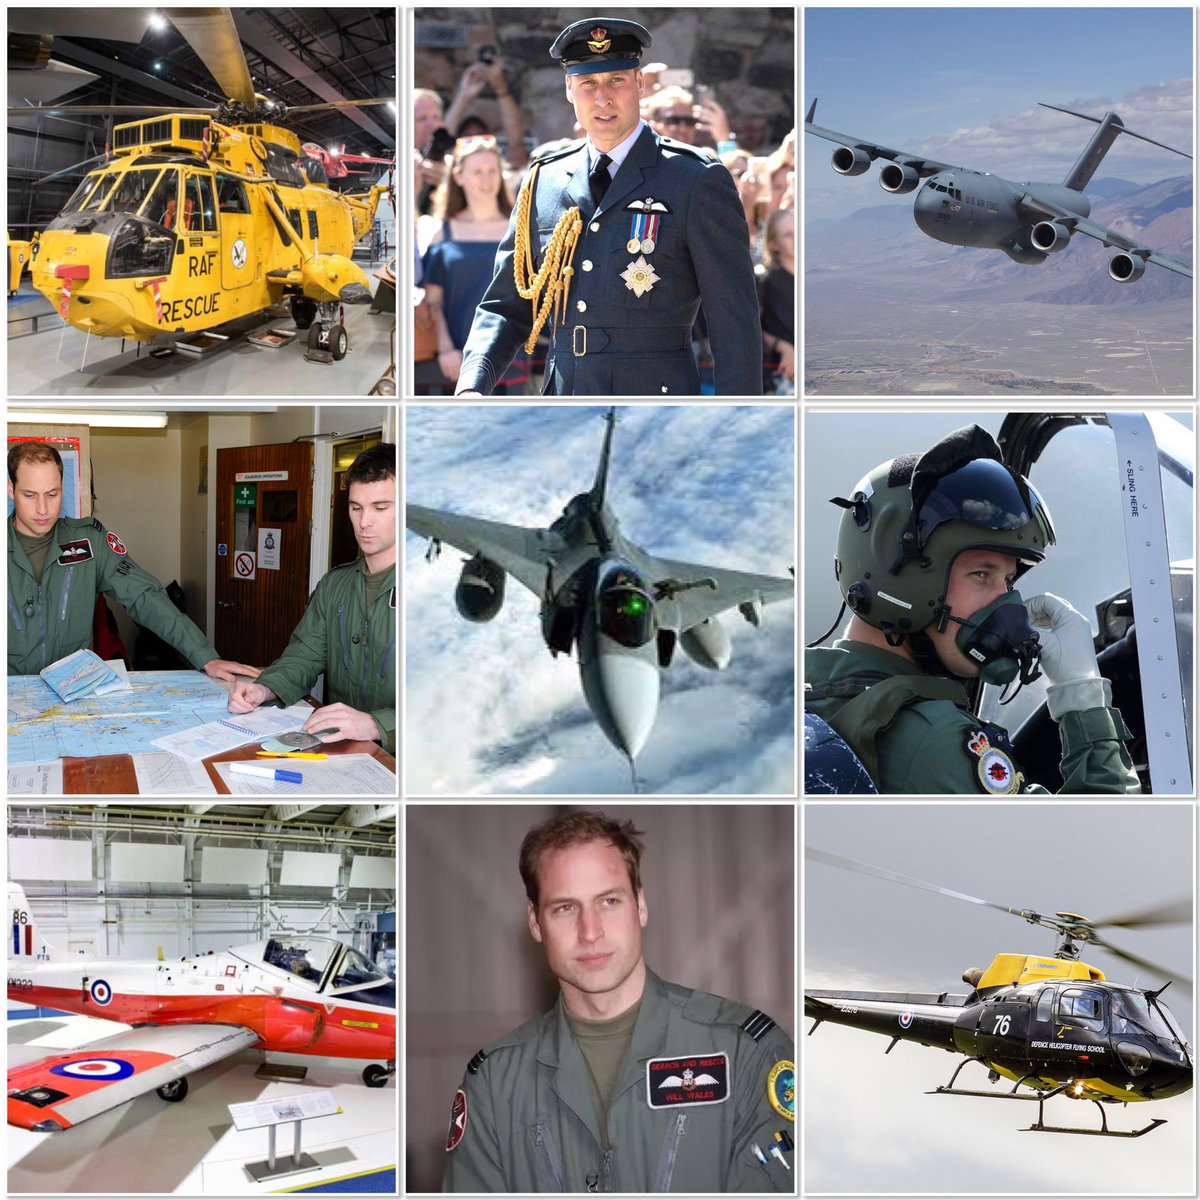 The jealousy from the sewer Sussex Squad became Prince William flew an Apache helicopter is so funny 🤣 

Nothing is stoping Prince Harry flying one but first he would need his pilots license and not just co-pilot 🤷🏽‍♂️ 

William has flown all of these 👇🏾

#PrinceWilliamIsAKing